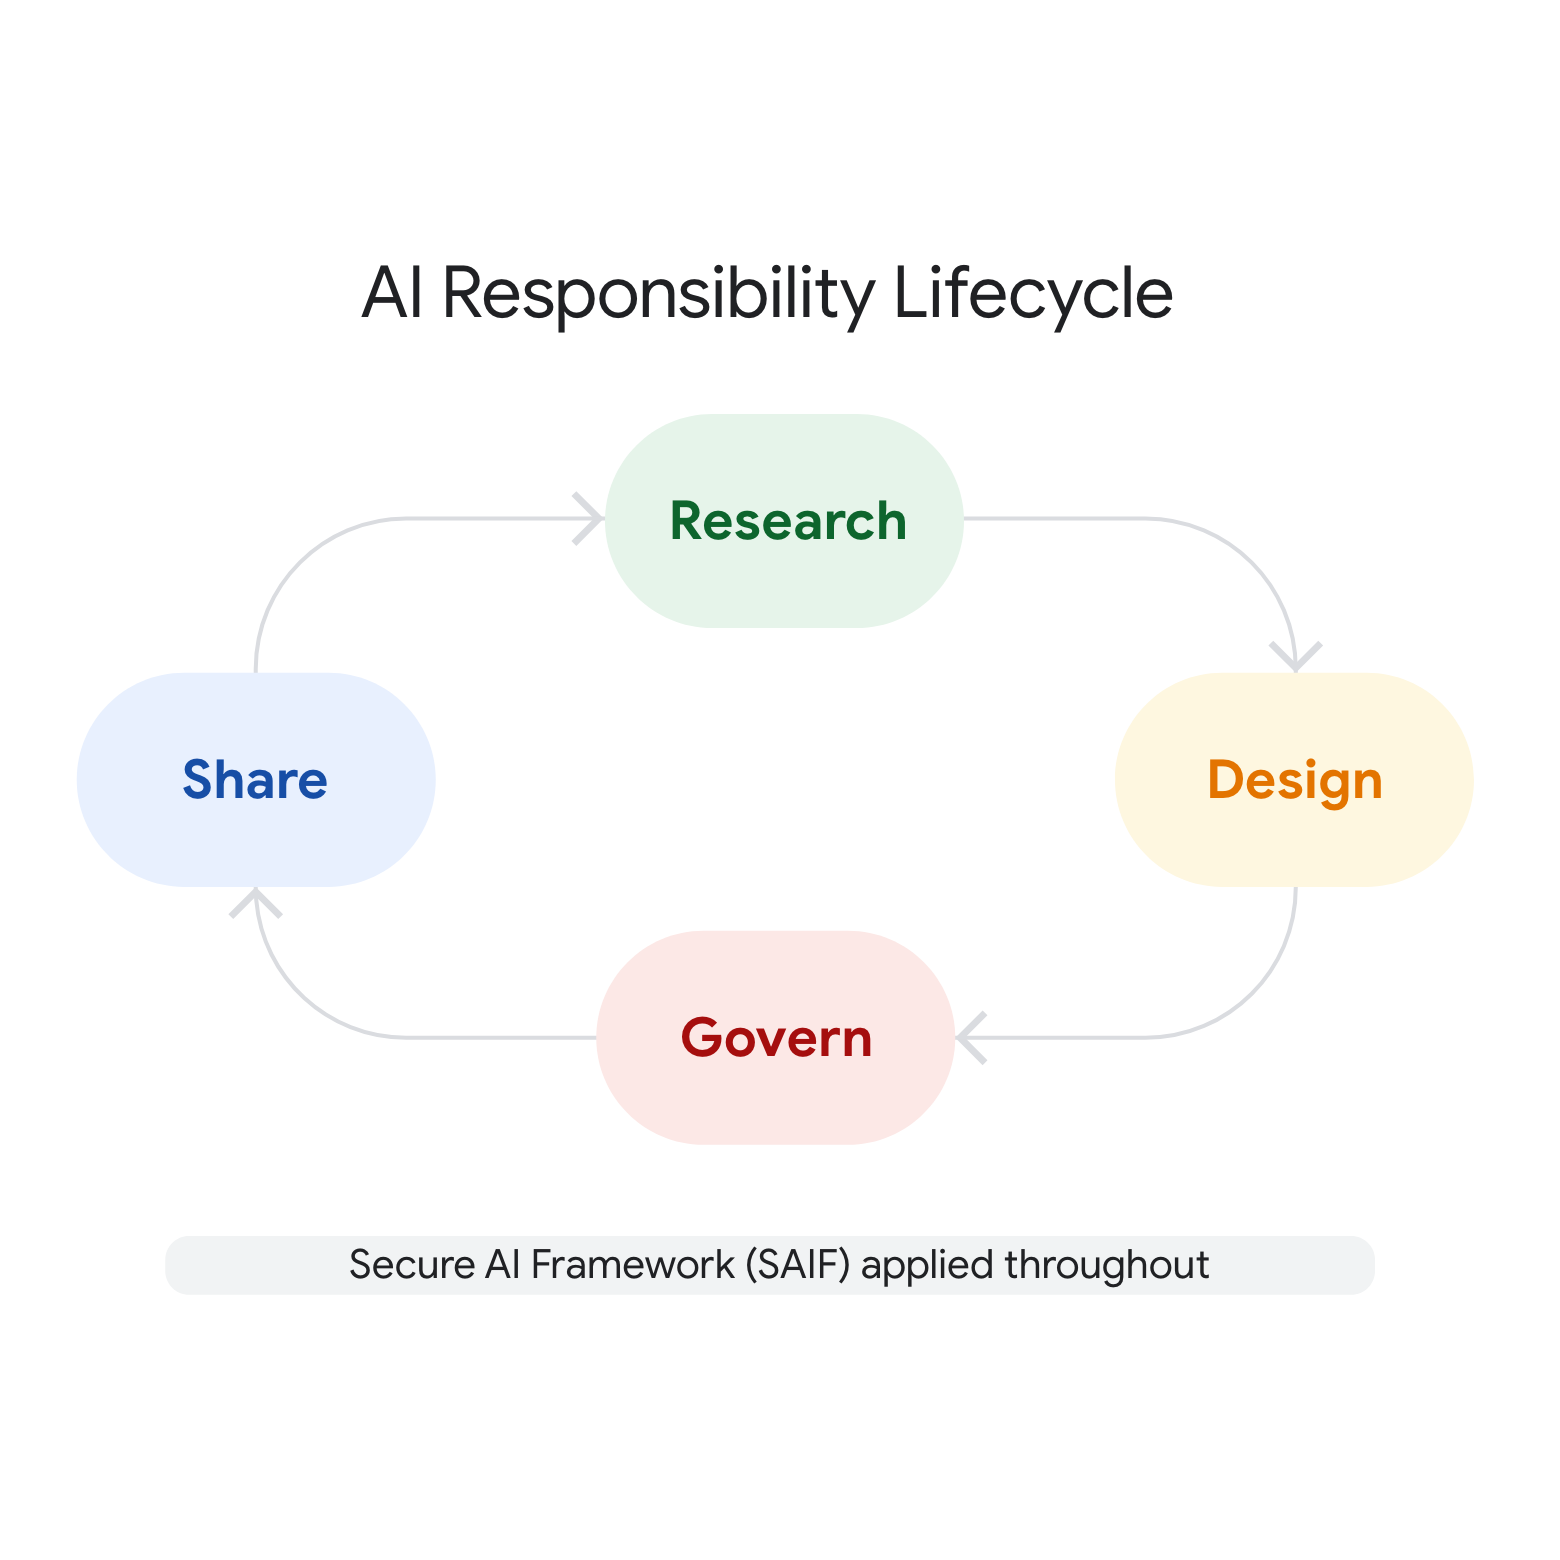 Flowchart depicting the AI Responsibility Lifecycle: Research, Design, Govern, Share, with Secure AI Framework (SAIF) applied throughout.